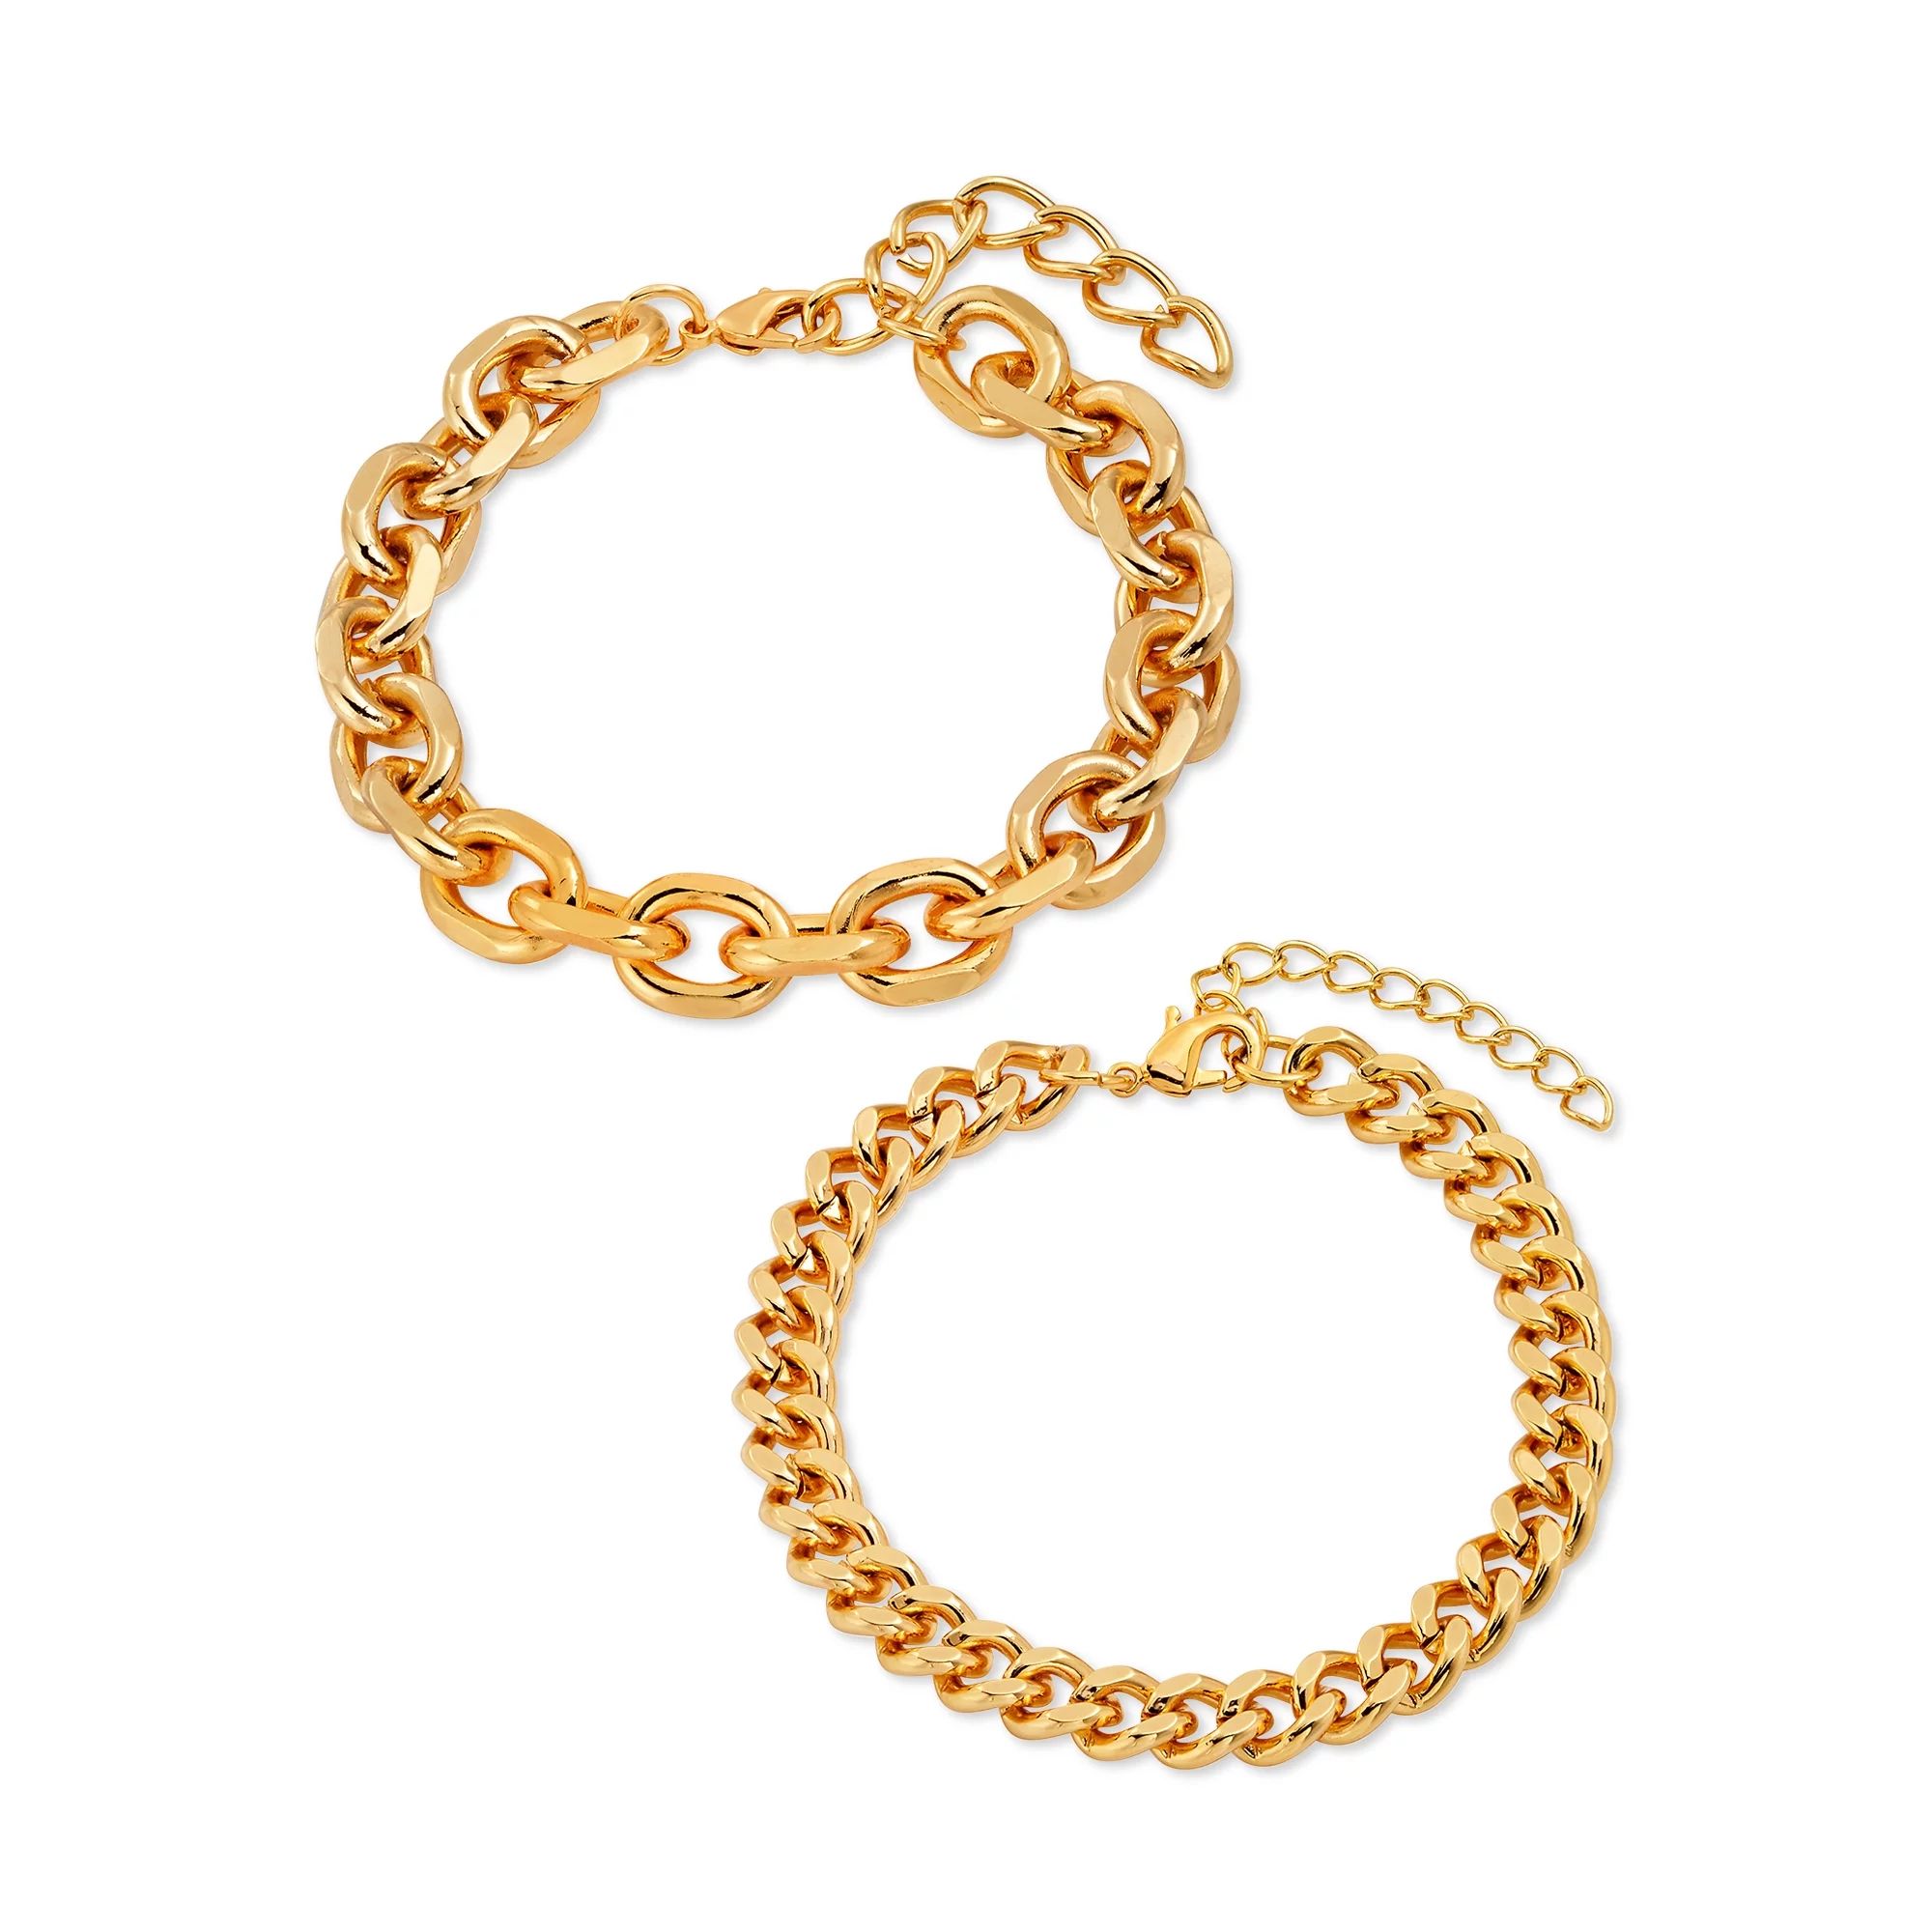 Scoop Womens Brass Yellow Gold-Plated Oval Link and Curb Chain Bracelets, 2-Piece Set | Walmart (US)